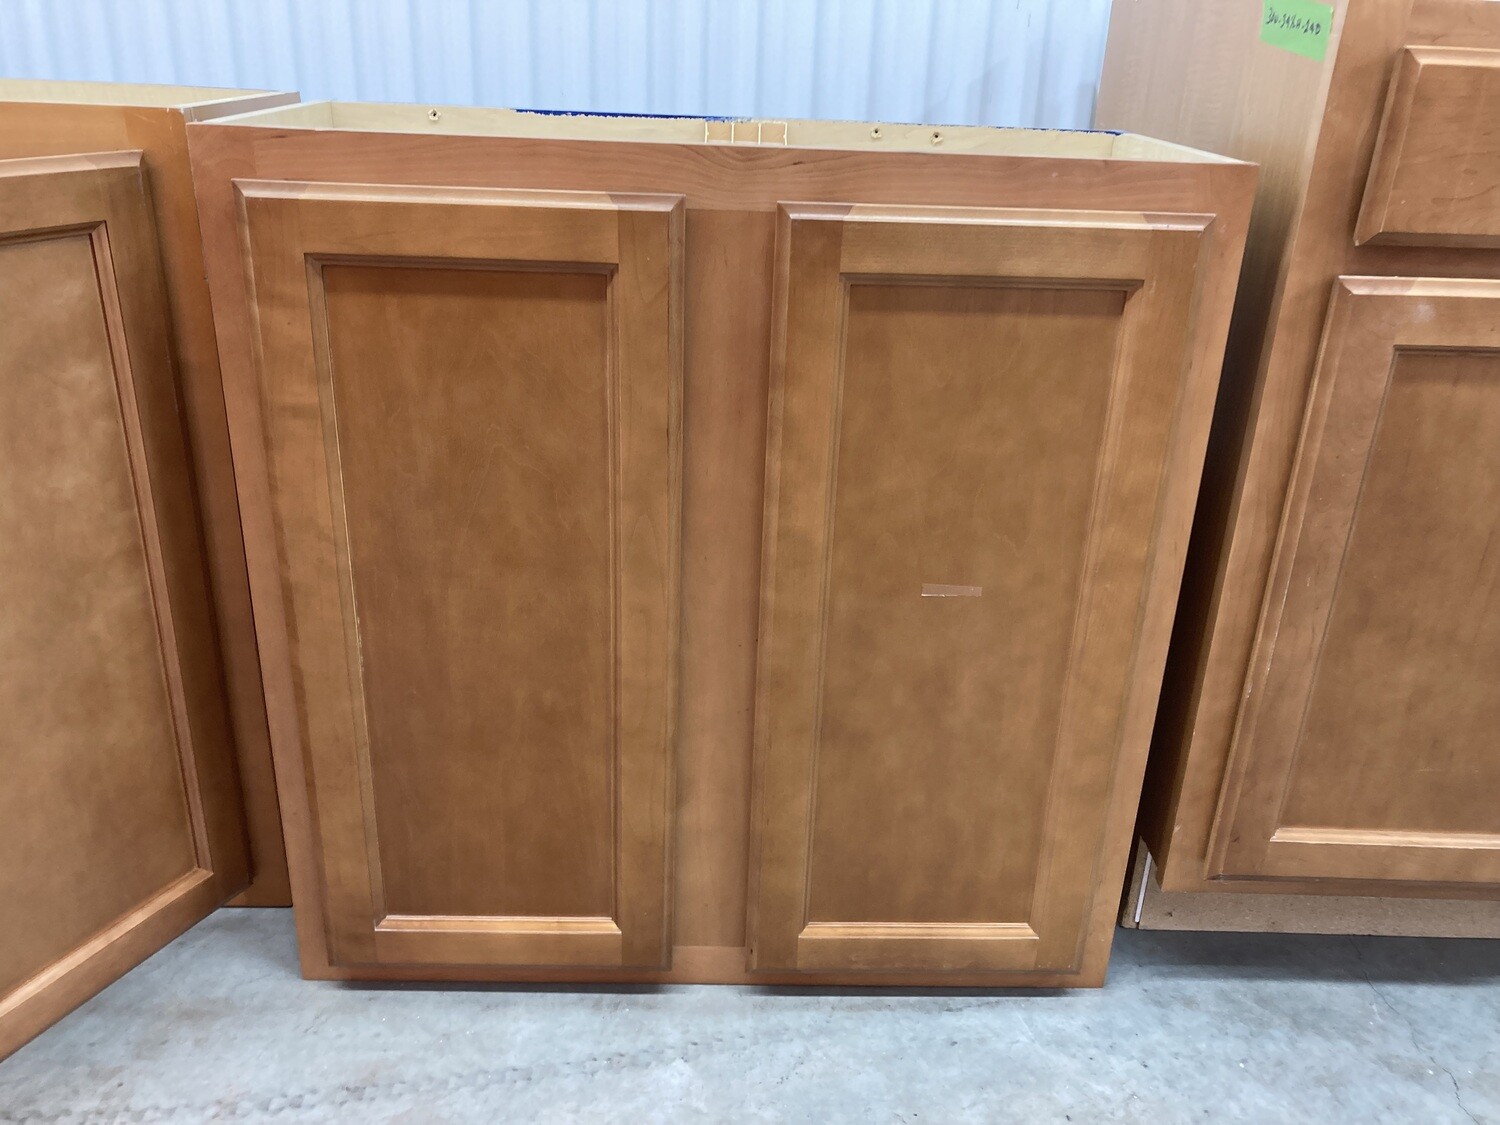 Set of 5 Kitchen Wall Cabinets, 30x30 lightly used #2003